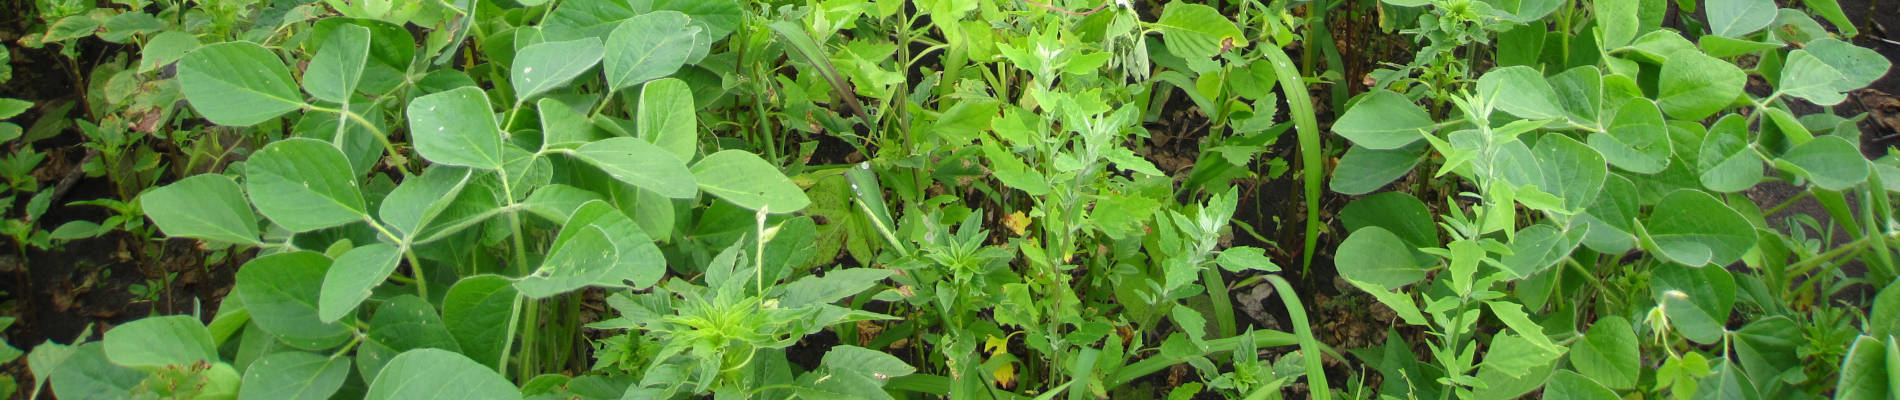 If broadleaf weeds become resistant to herbicide, soybeans yield will be affected